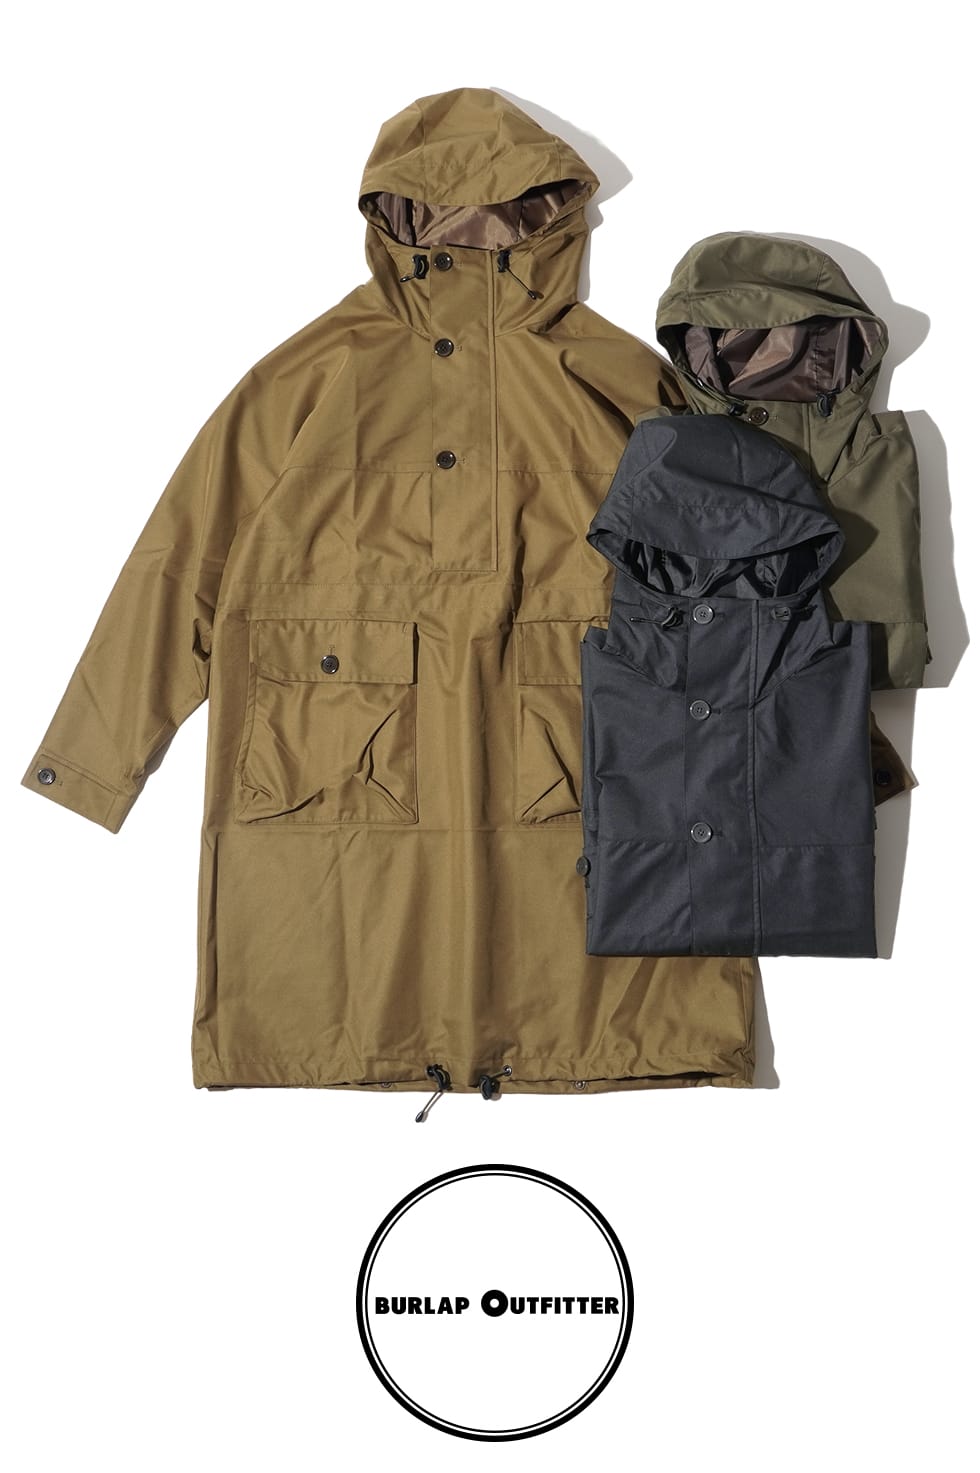 BURLAP OUTFITTER PLW CAGOULE カグール シェル プル